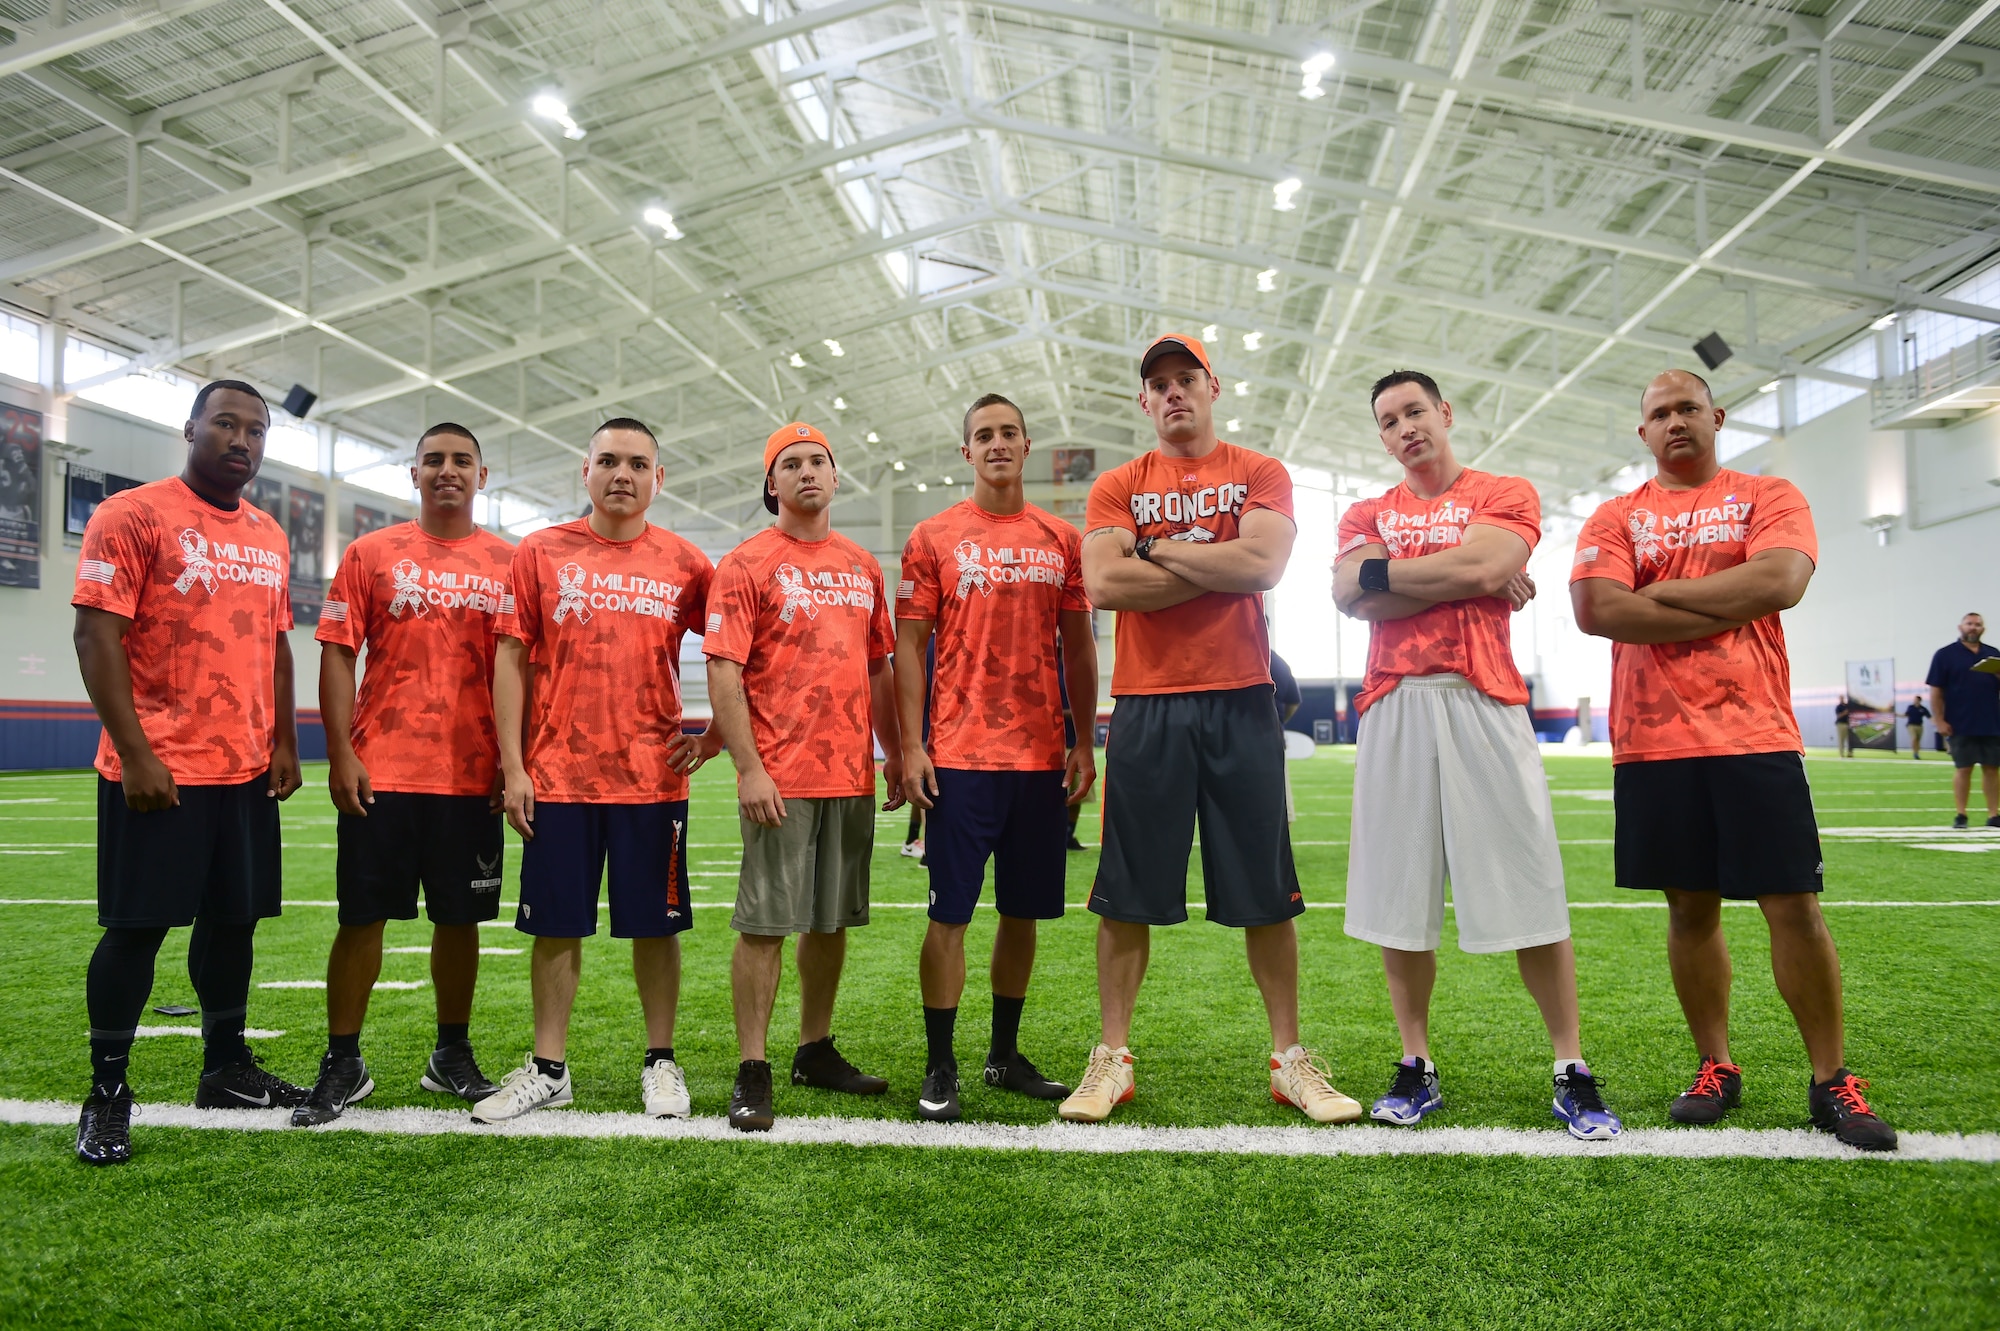 Team Buckley members stand ready to take on the military combine hosted by the Denver Broncos organization and United Services Automotive Association Aug. 7, 2015, at the Denver Broncos Headquarters Facility at Dove Valley in Denver. The combine consisted of drills similar to the ones prospective National Football League players are expected to complete during the NFL combine held in Indianapolis before the NFL draft. All participants were also treated to a viewing of the Broncos’ Friday morning practice and a visit from Broncos players, as well as the head coach. (U.S. Air Force photo by Airman 1st Class Luke W. Nowakowski/Released)